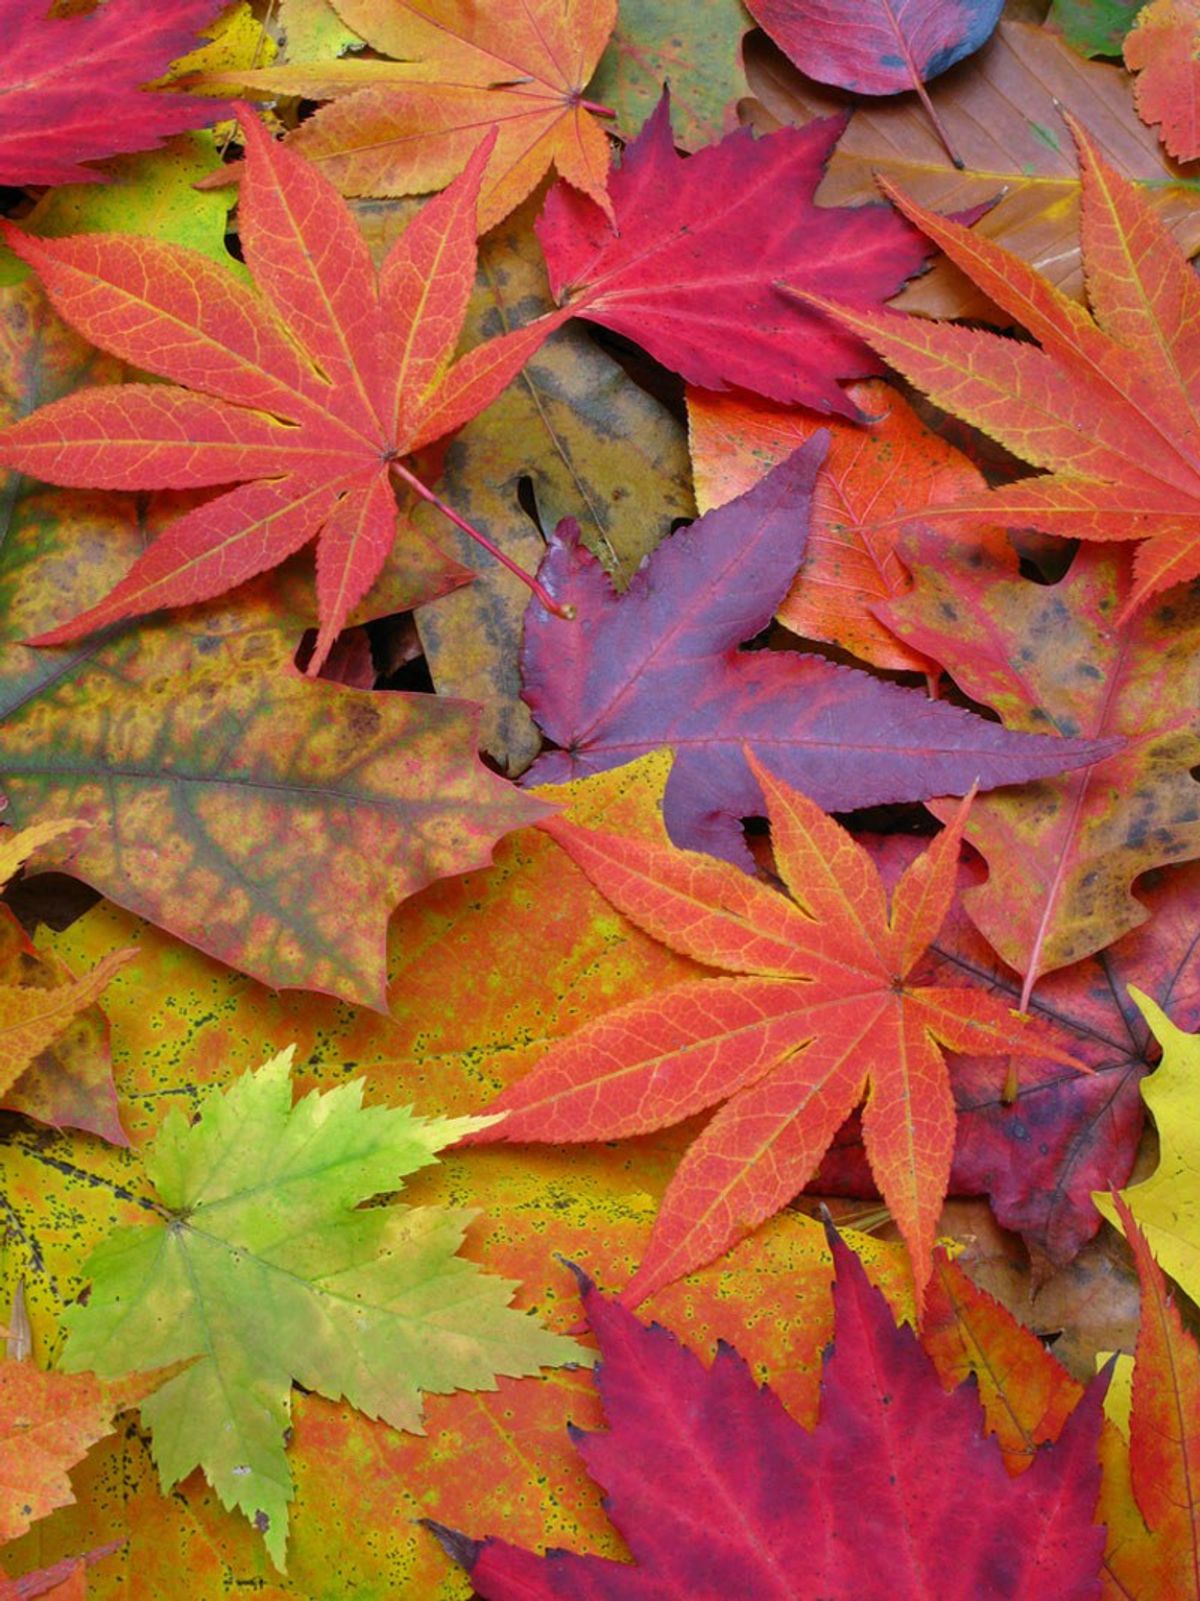 5 Reasosn Why Autumn Is The Best Season Of The Year